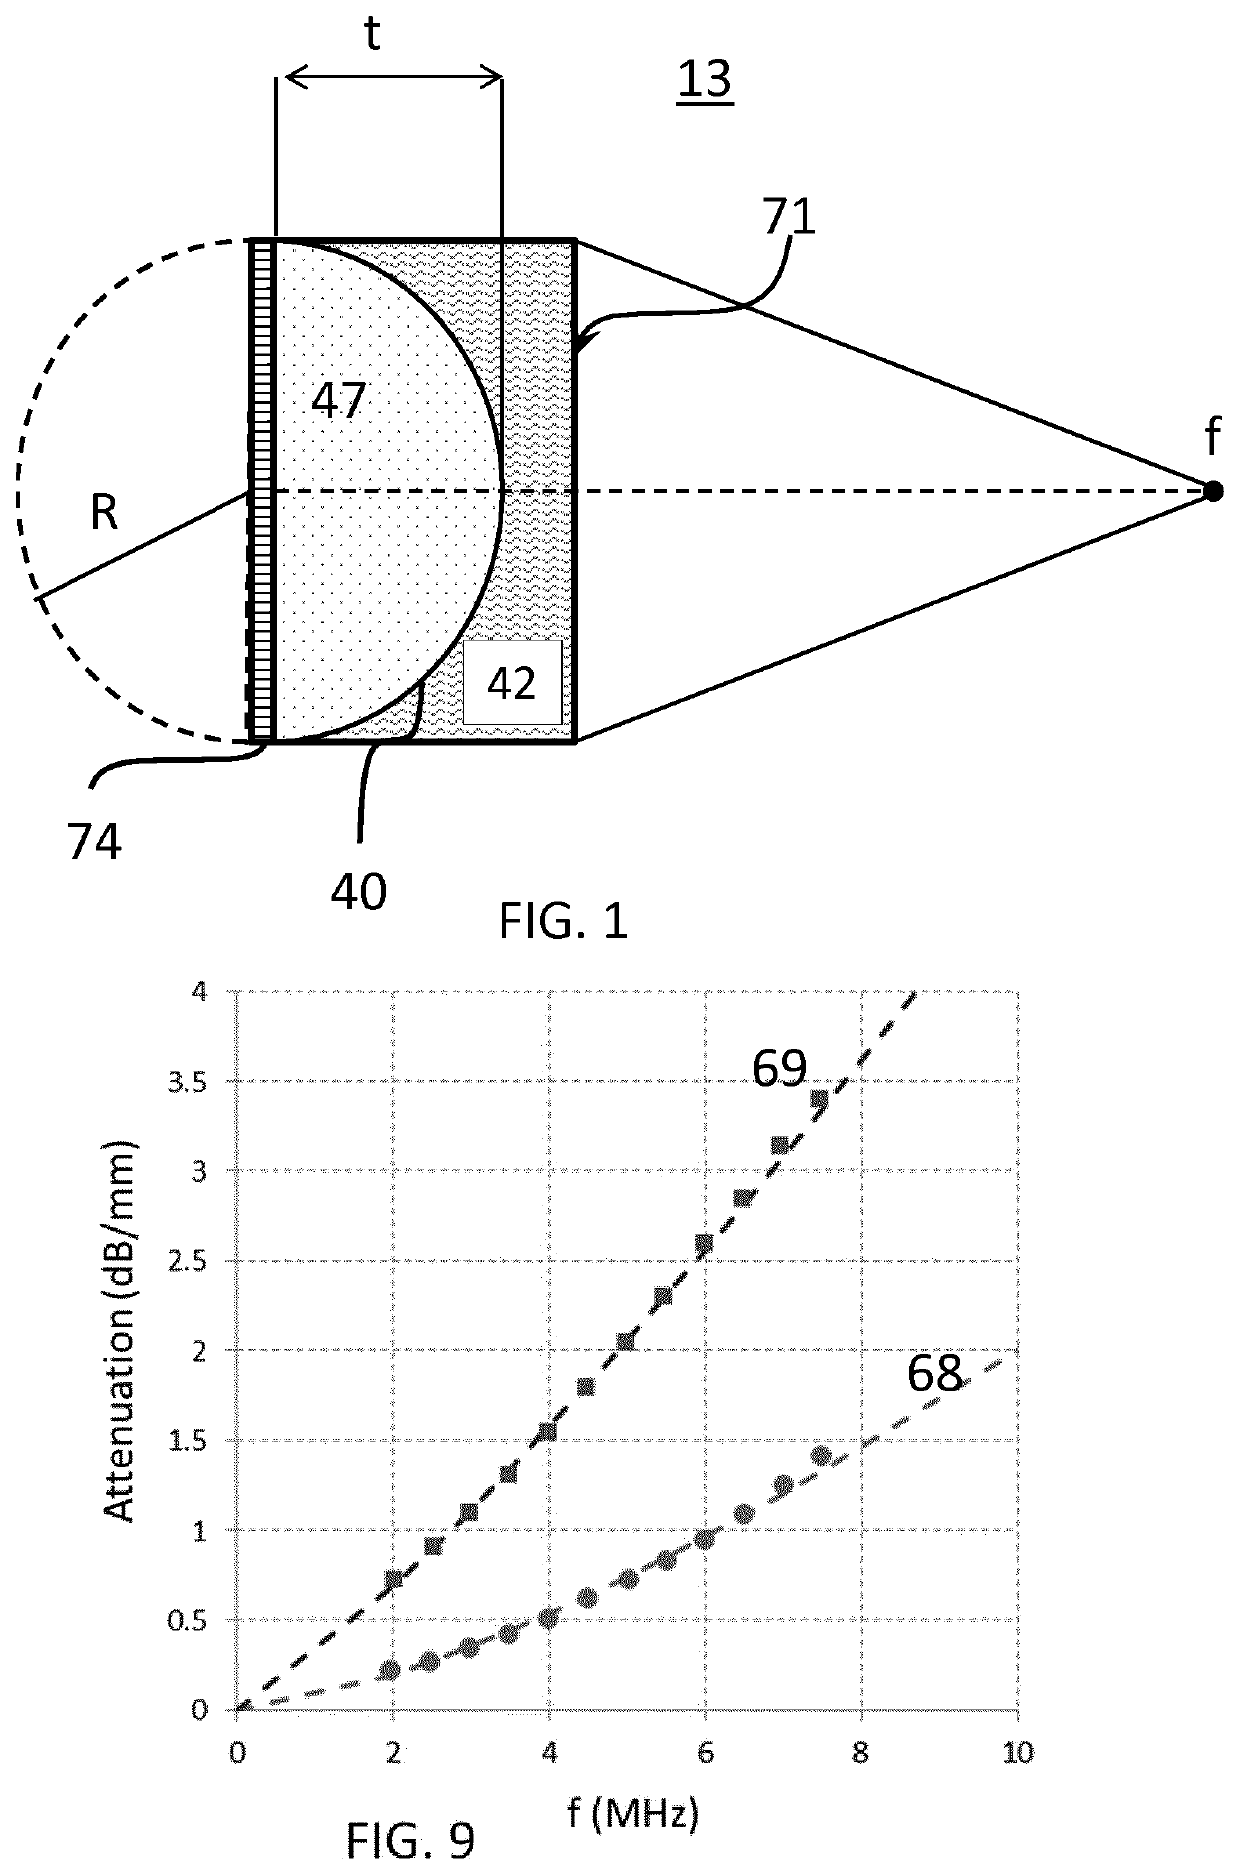 Acoustic lens for an ultrasound array